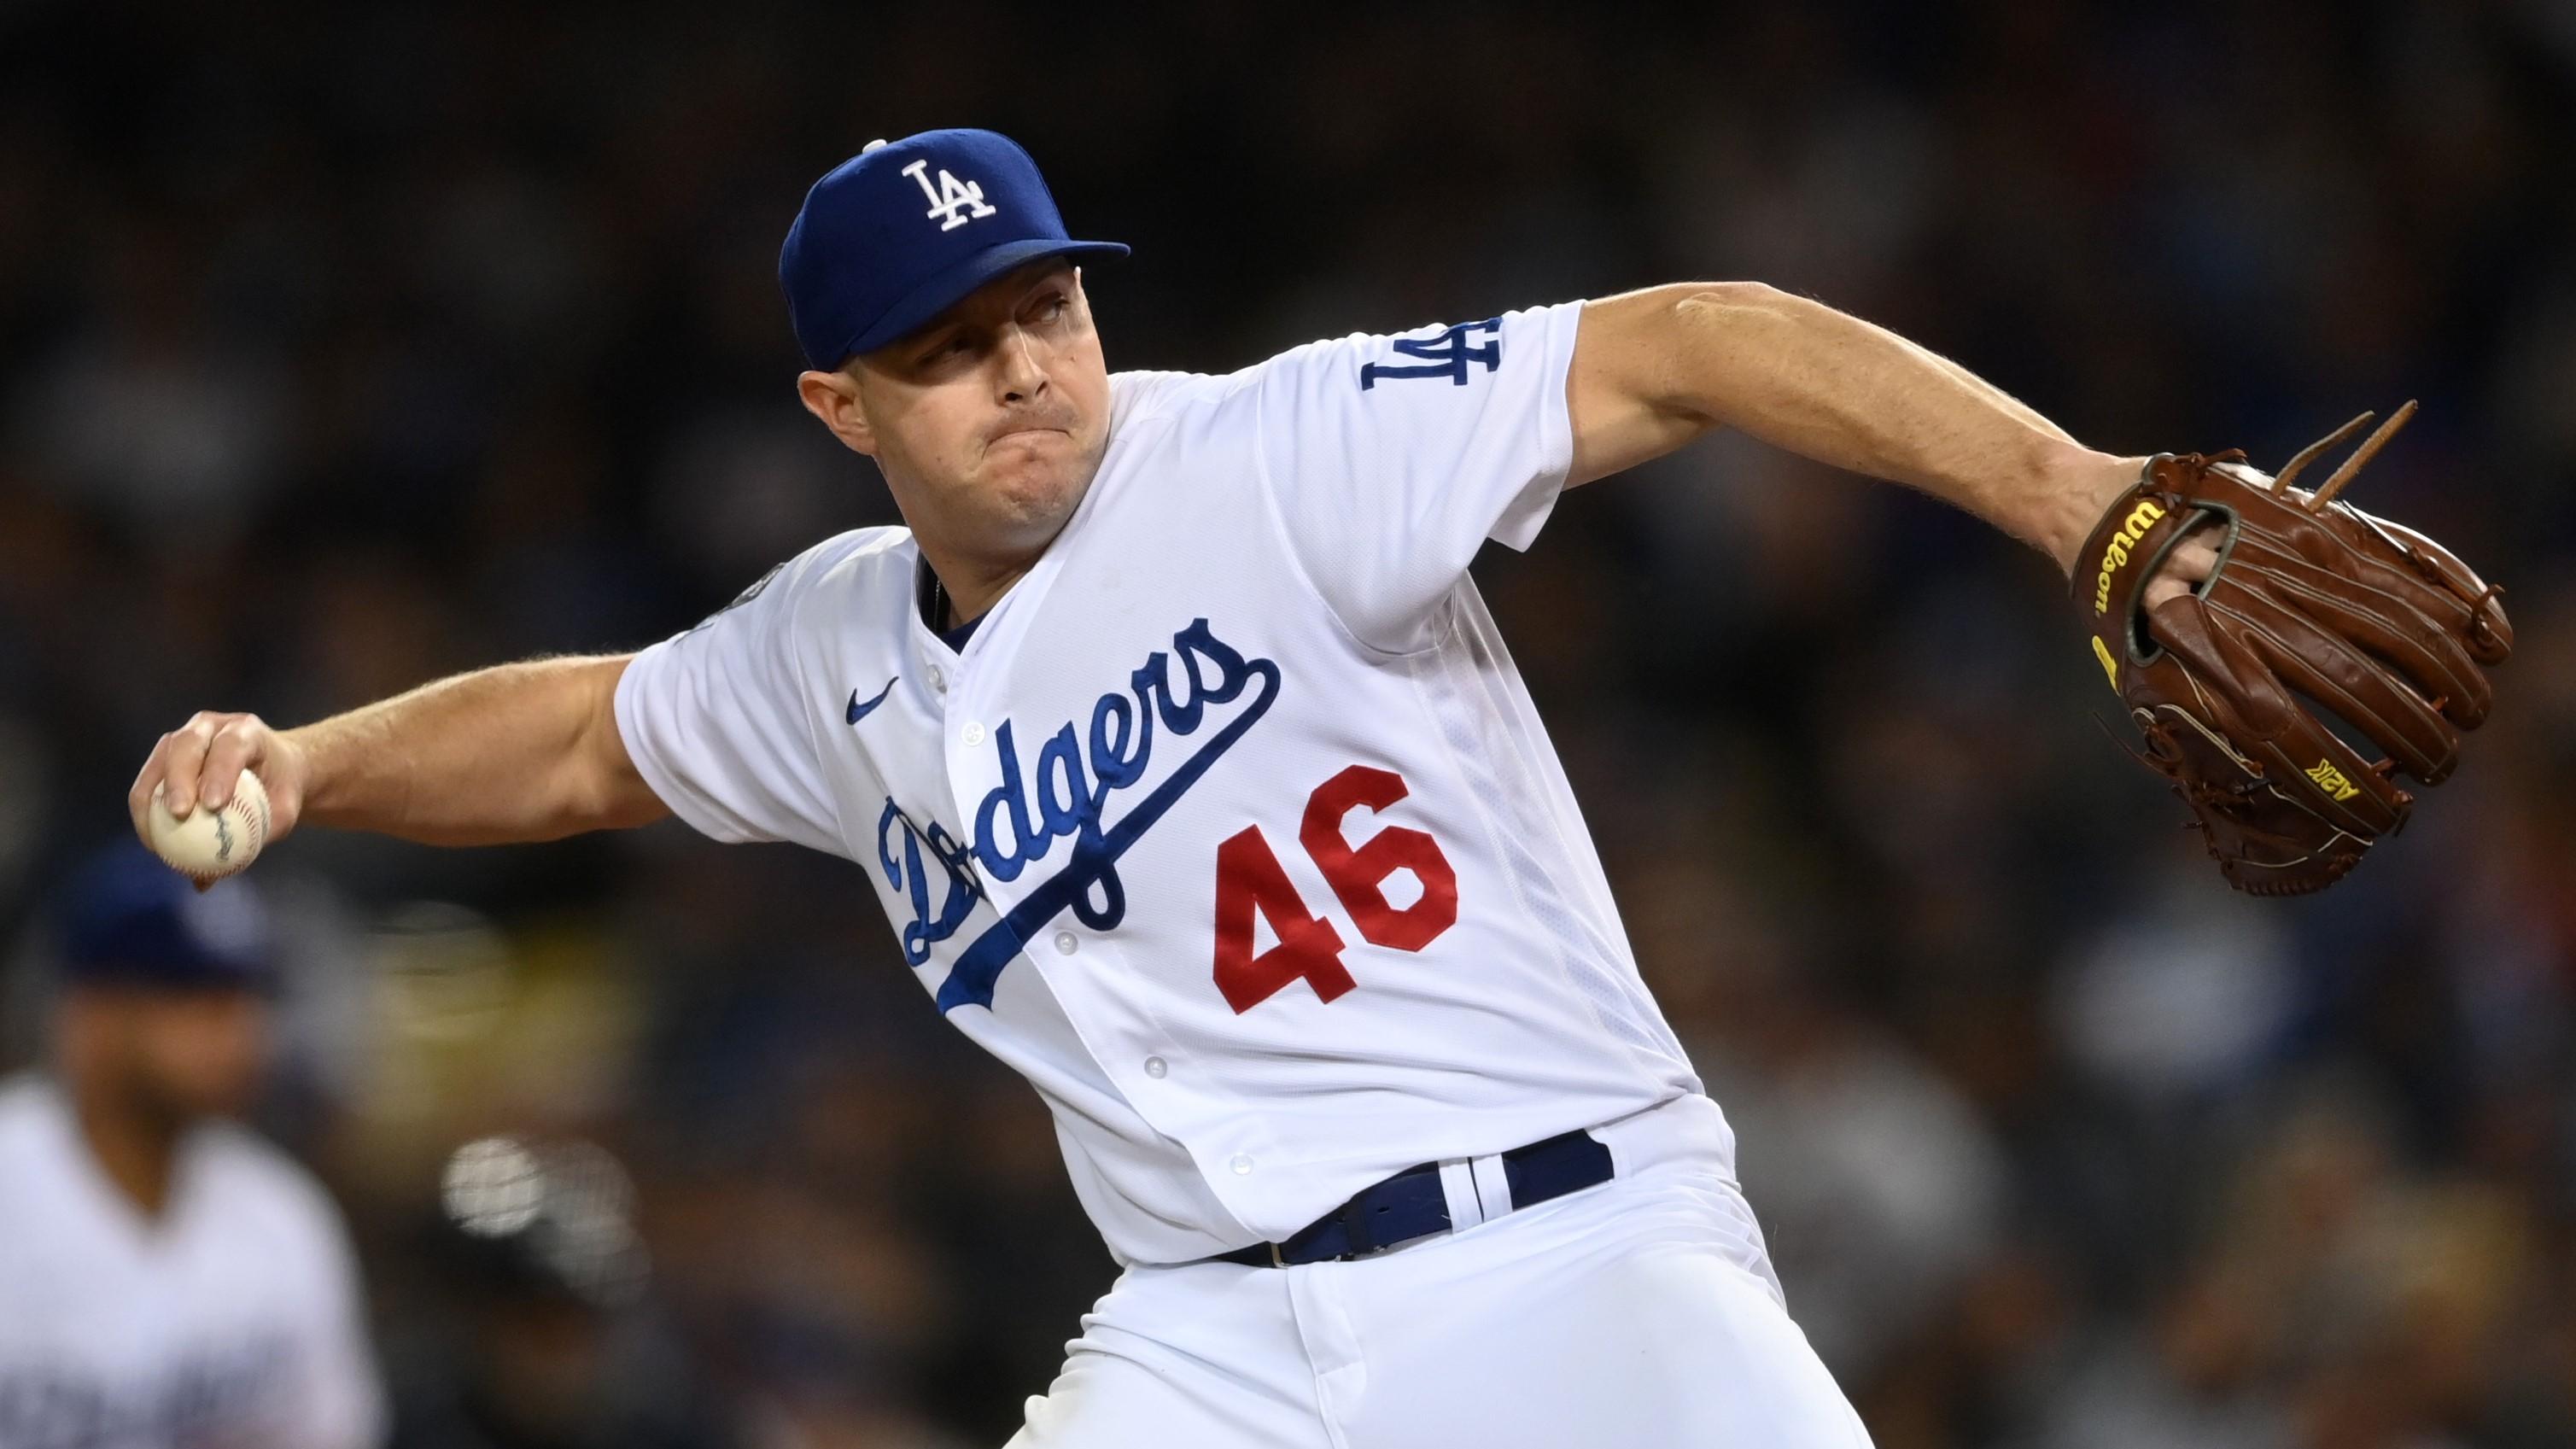 Oct 21, 2021; Los Angeles, California, USA; Los Angeles Dodgers relief pitcher Corey Knebel (46) pitches in the eighth inning against the Atlanta Braves during game five of the 2021 NLCS at Dodger Stadium. / Jayne Kamin-Oncea-USA TODAY Sports